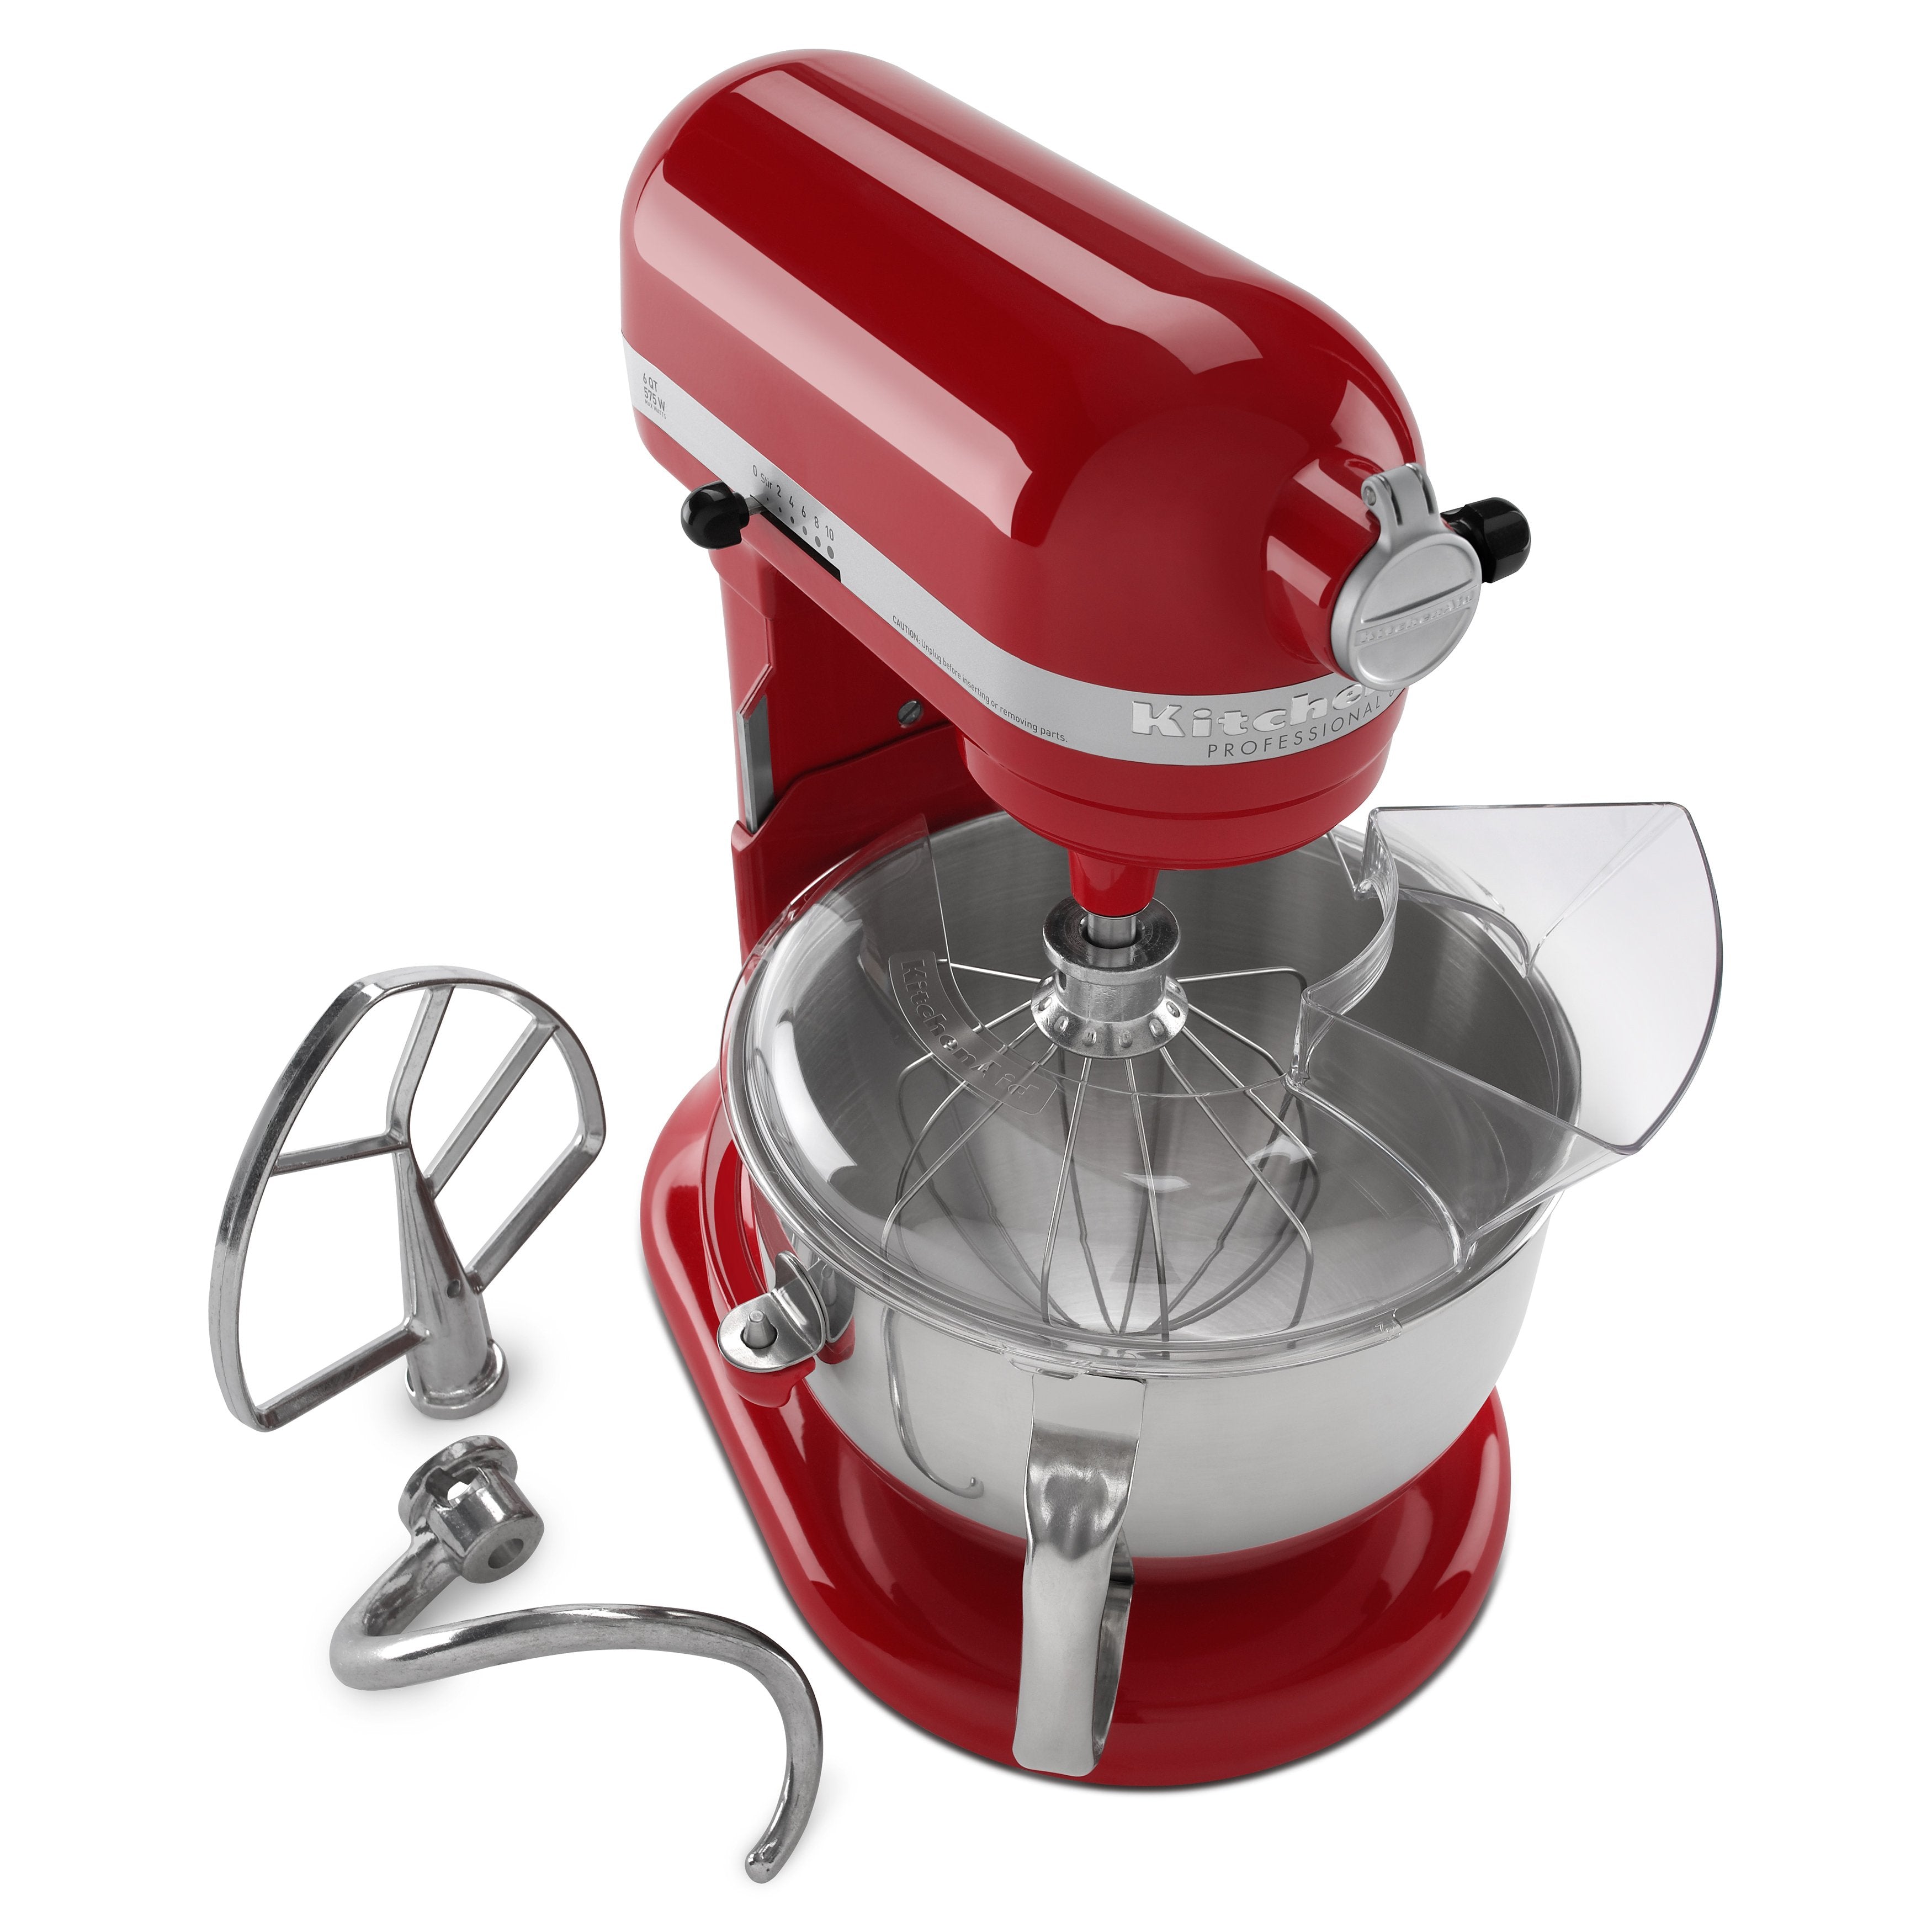 KitchenAid Professional 600 Series 6 Quart Stand Mixer Unboxing - Empire Red  KP26M1XER 